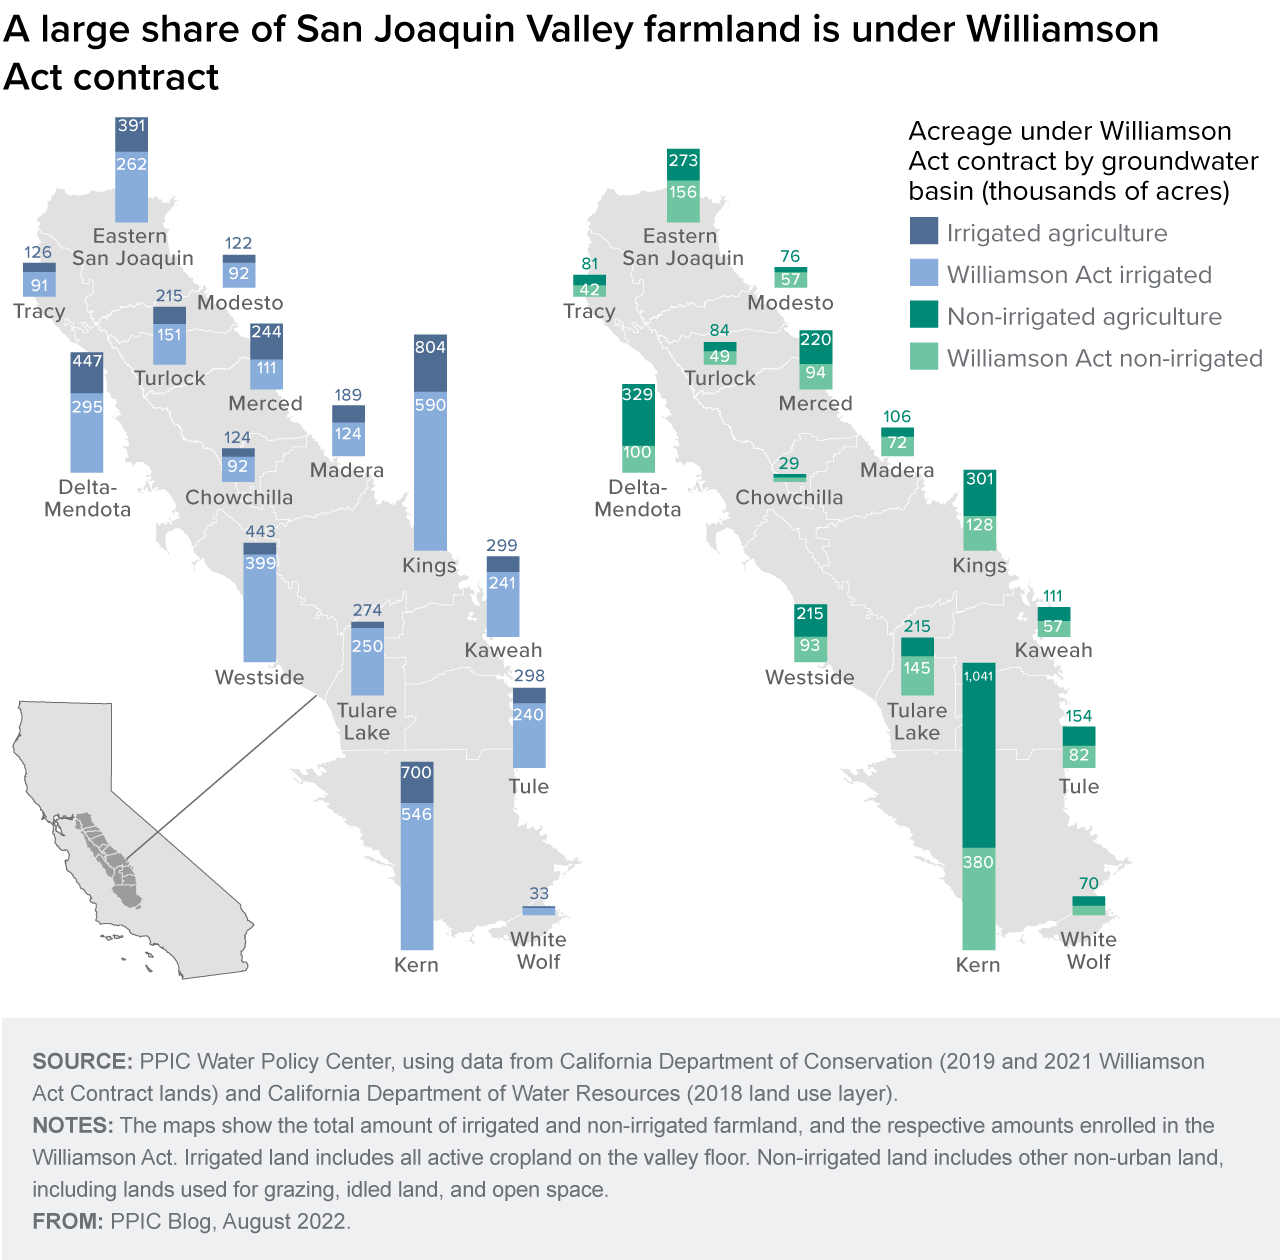 figure - A large share of San Joaquin Valley farmland is under Williamson Act contract